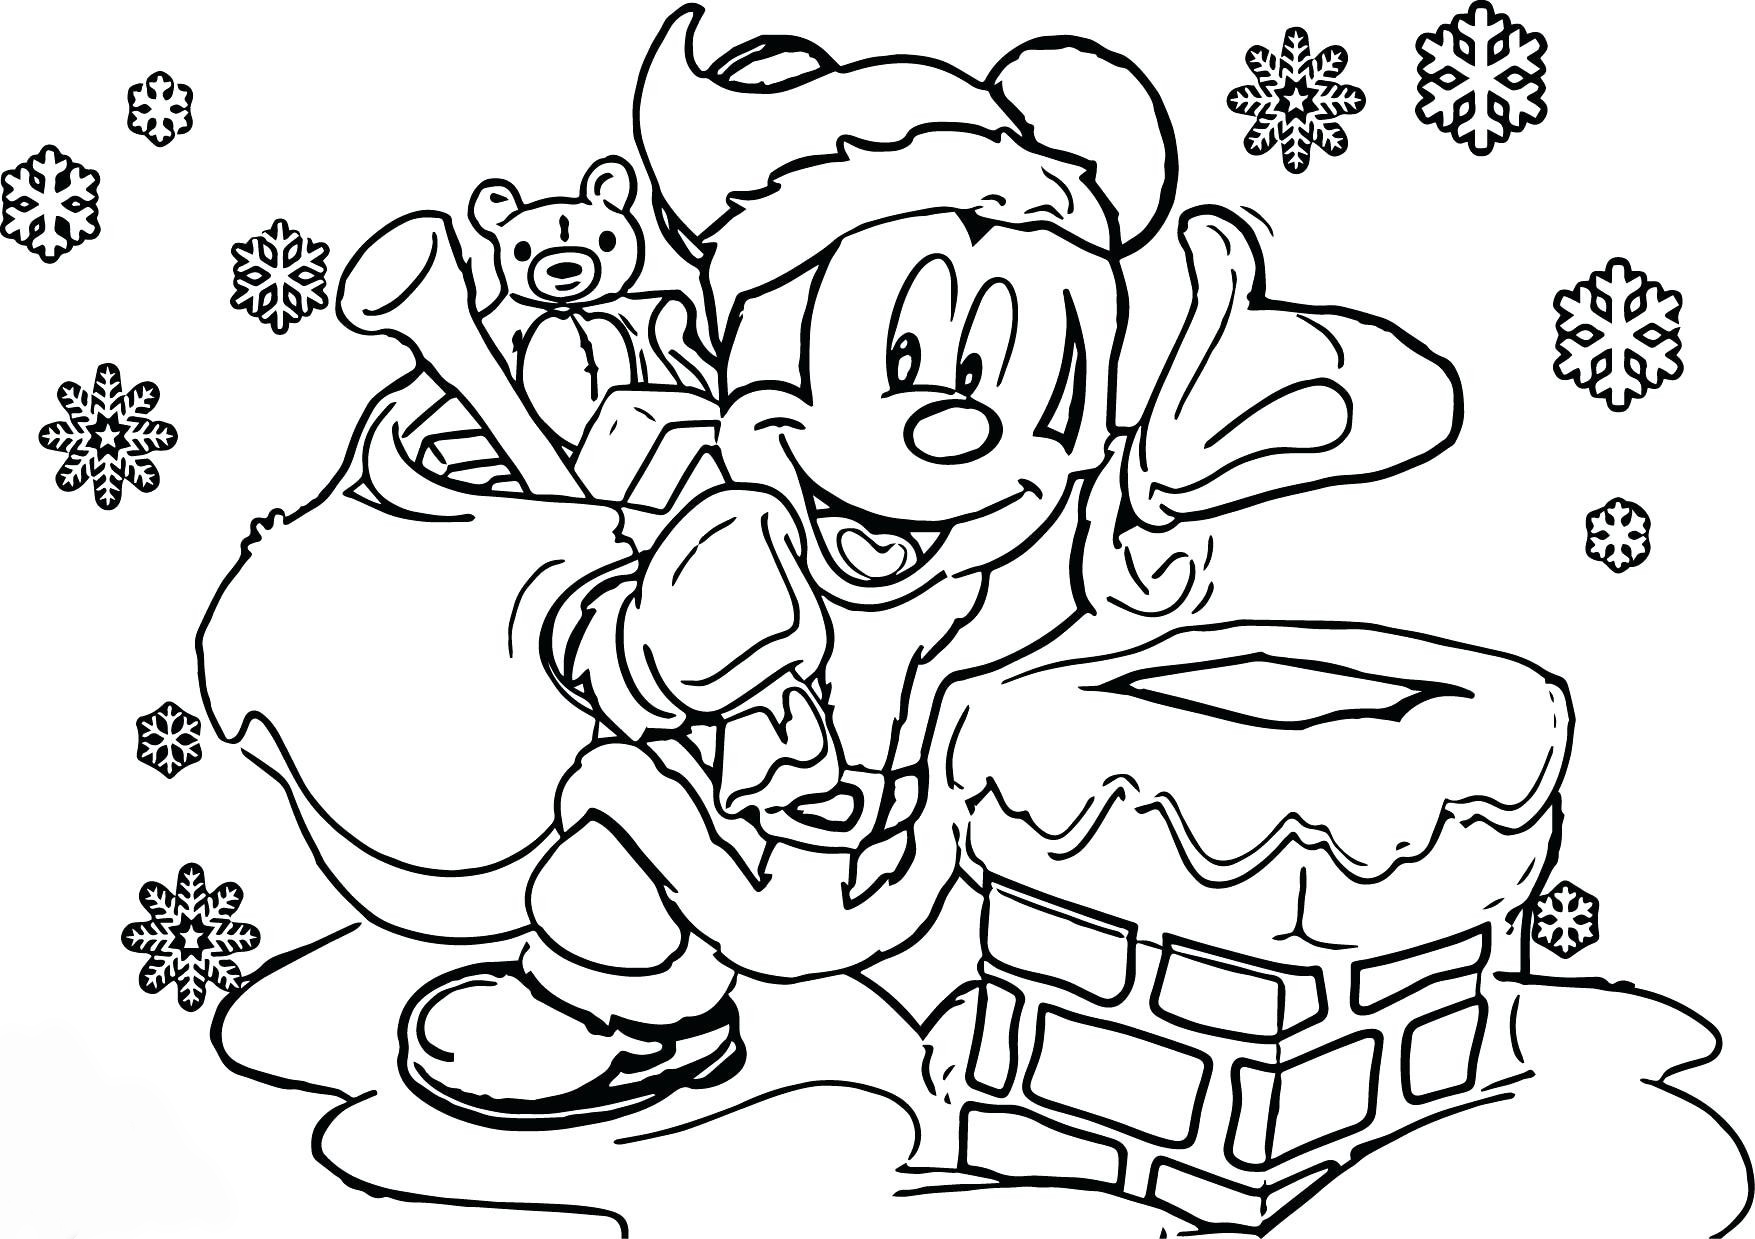 mickey-mouse-christmas-coloring-pages-best-coloring-pages-for-kids